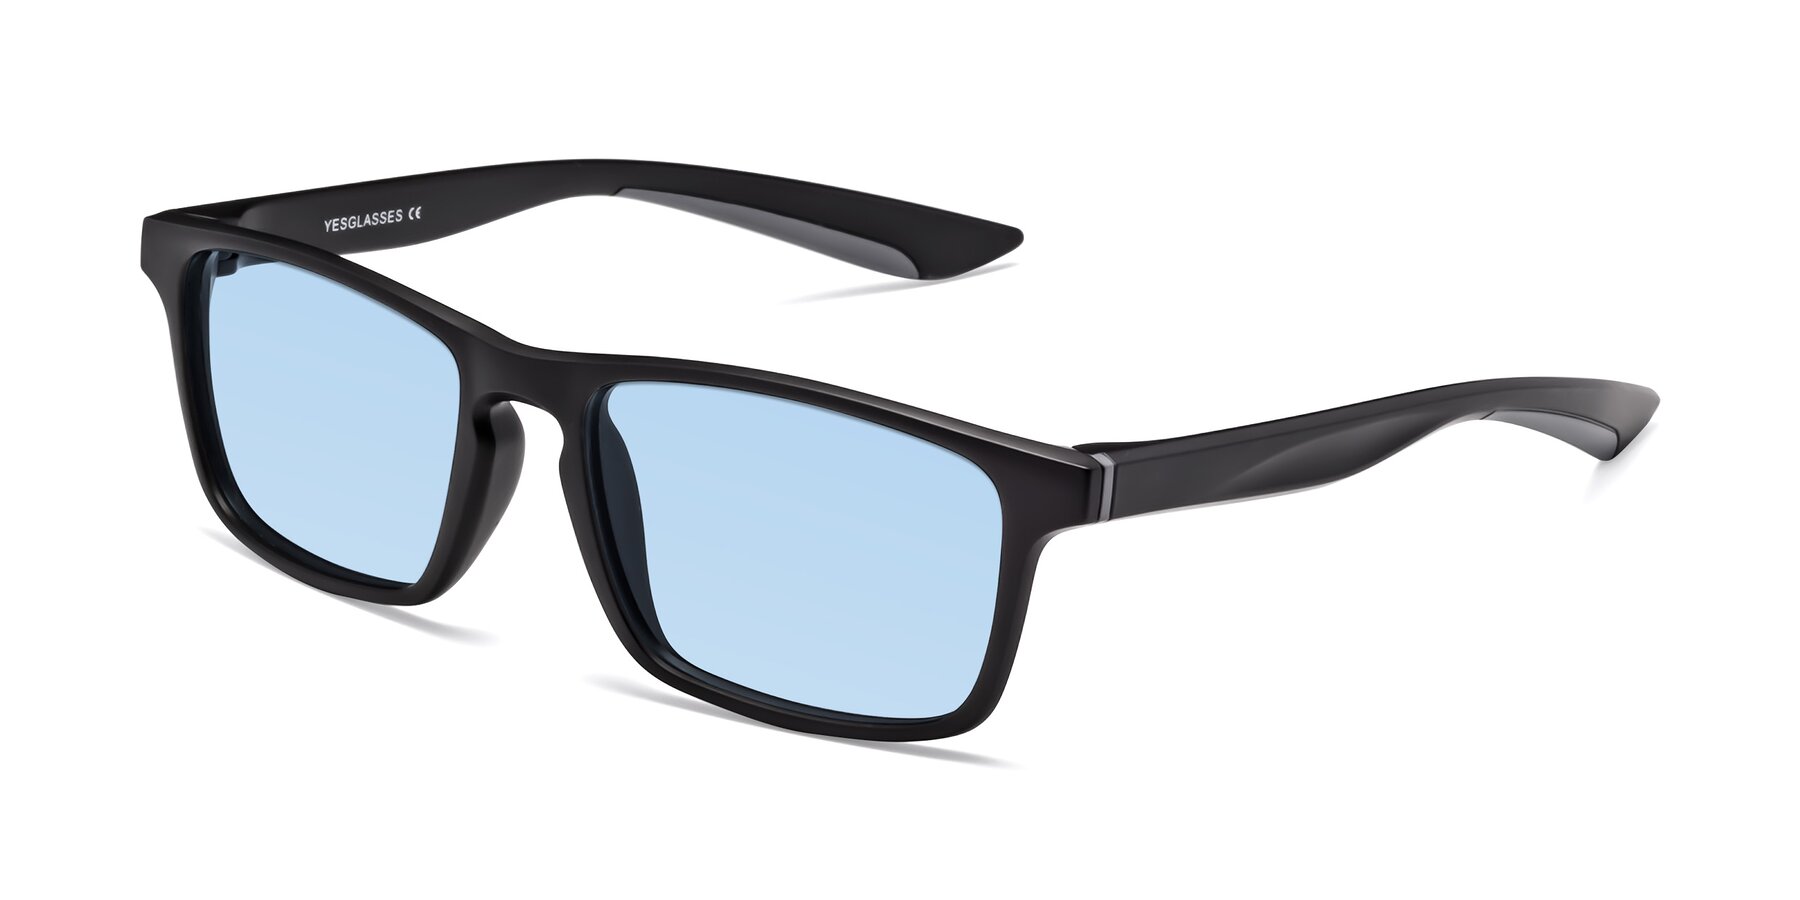 Angle of Passion in Matte Black-Gray with Light Blue Tinted Lenses